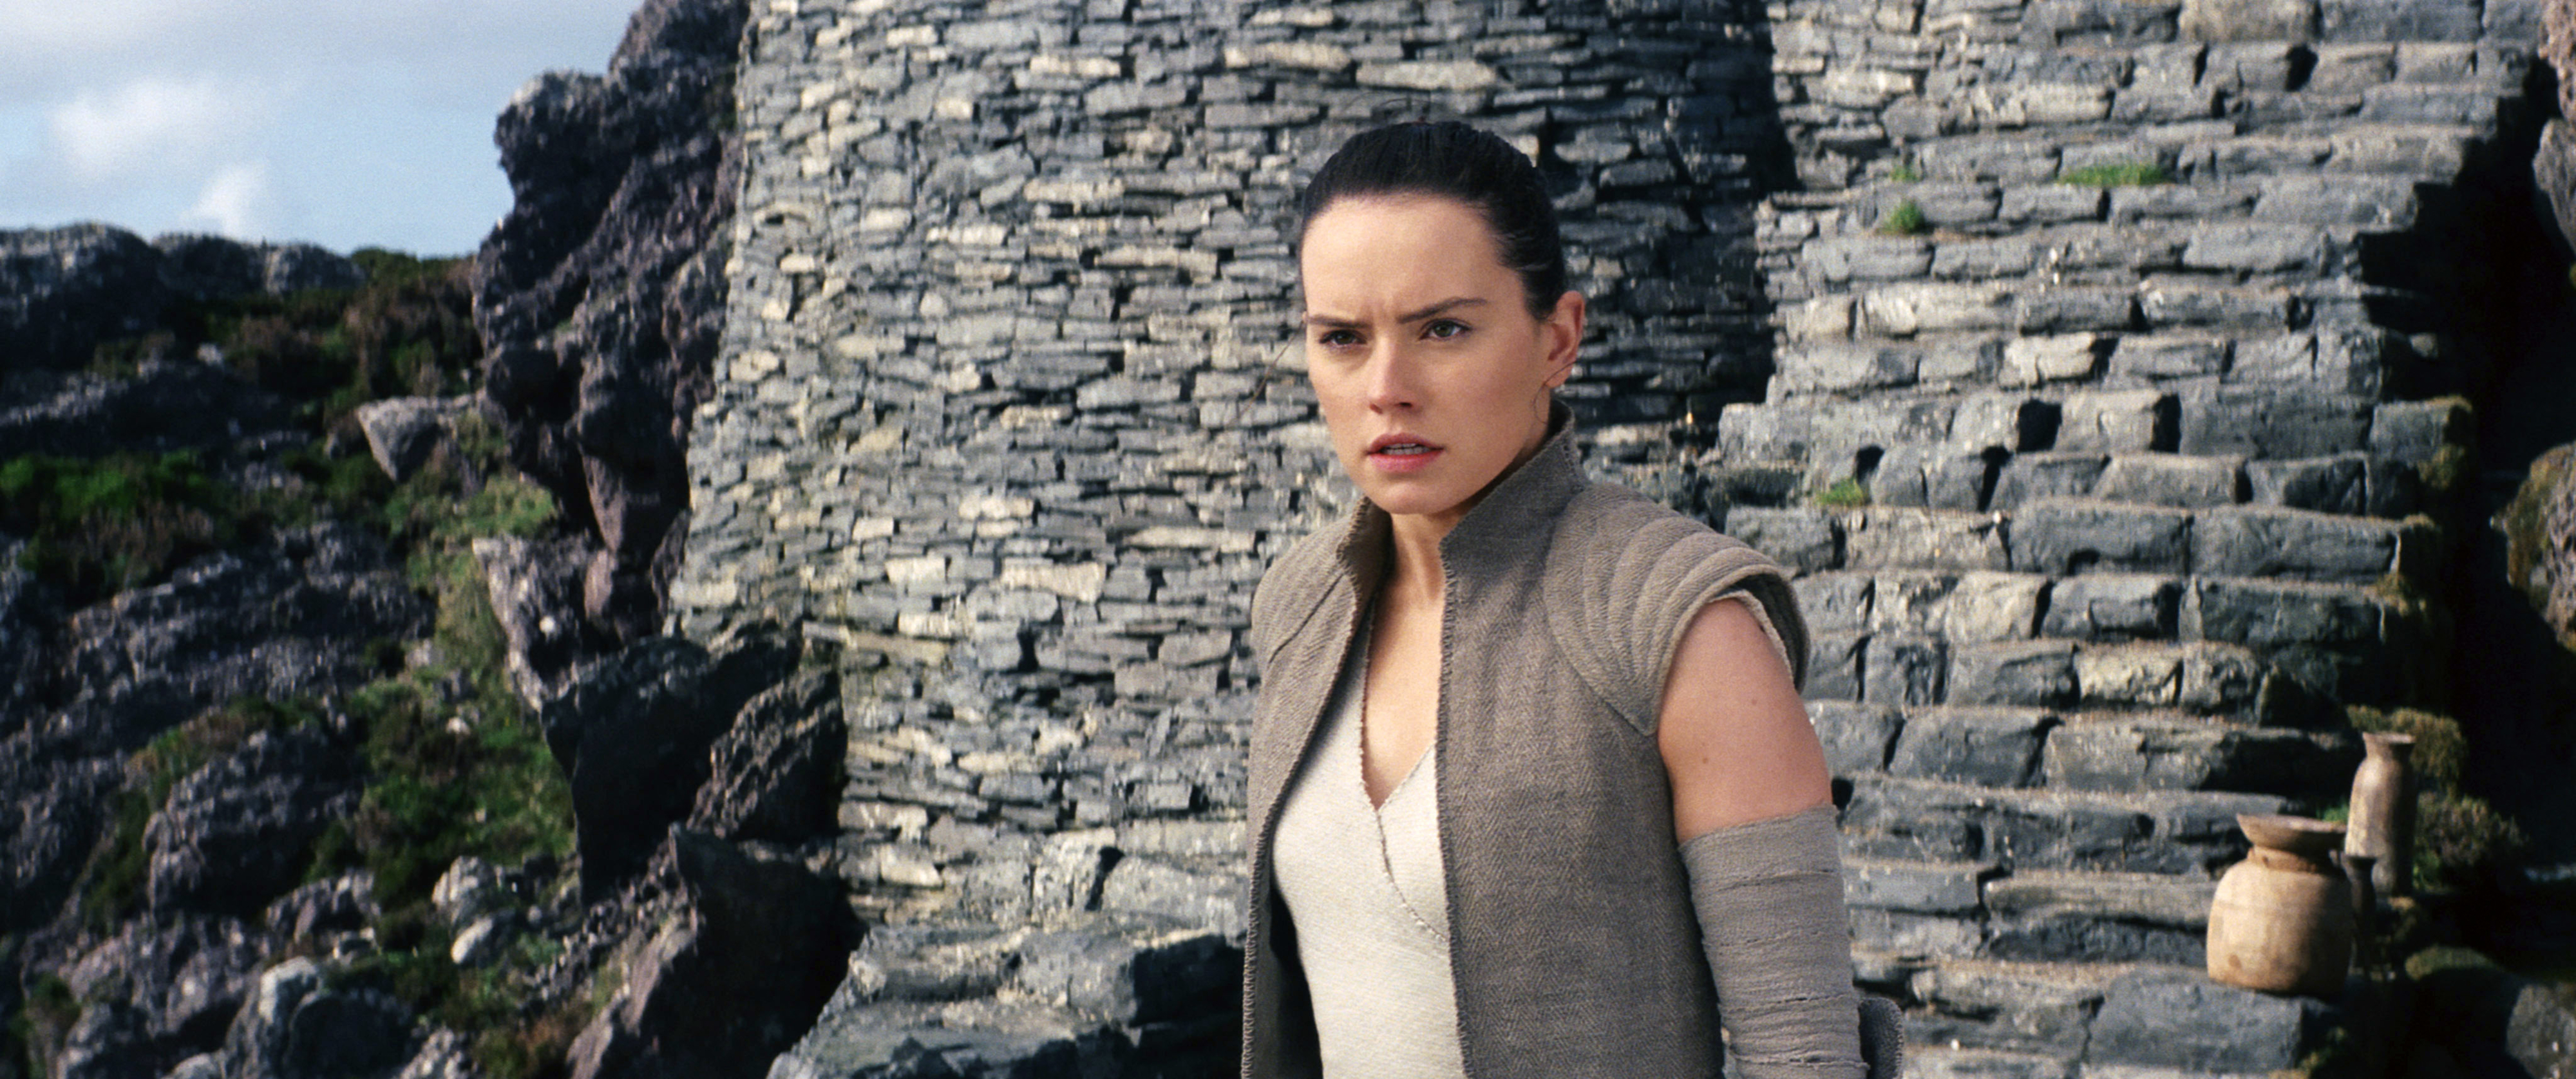 Rey from Star Wars standing in front of a stone wall, expressive and determined